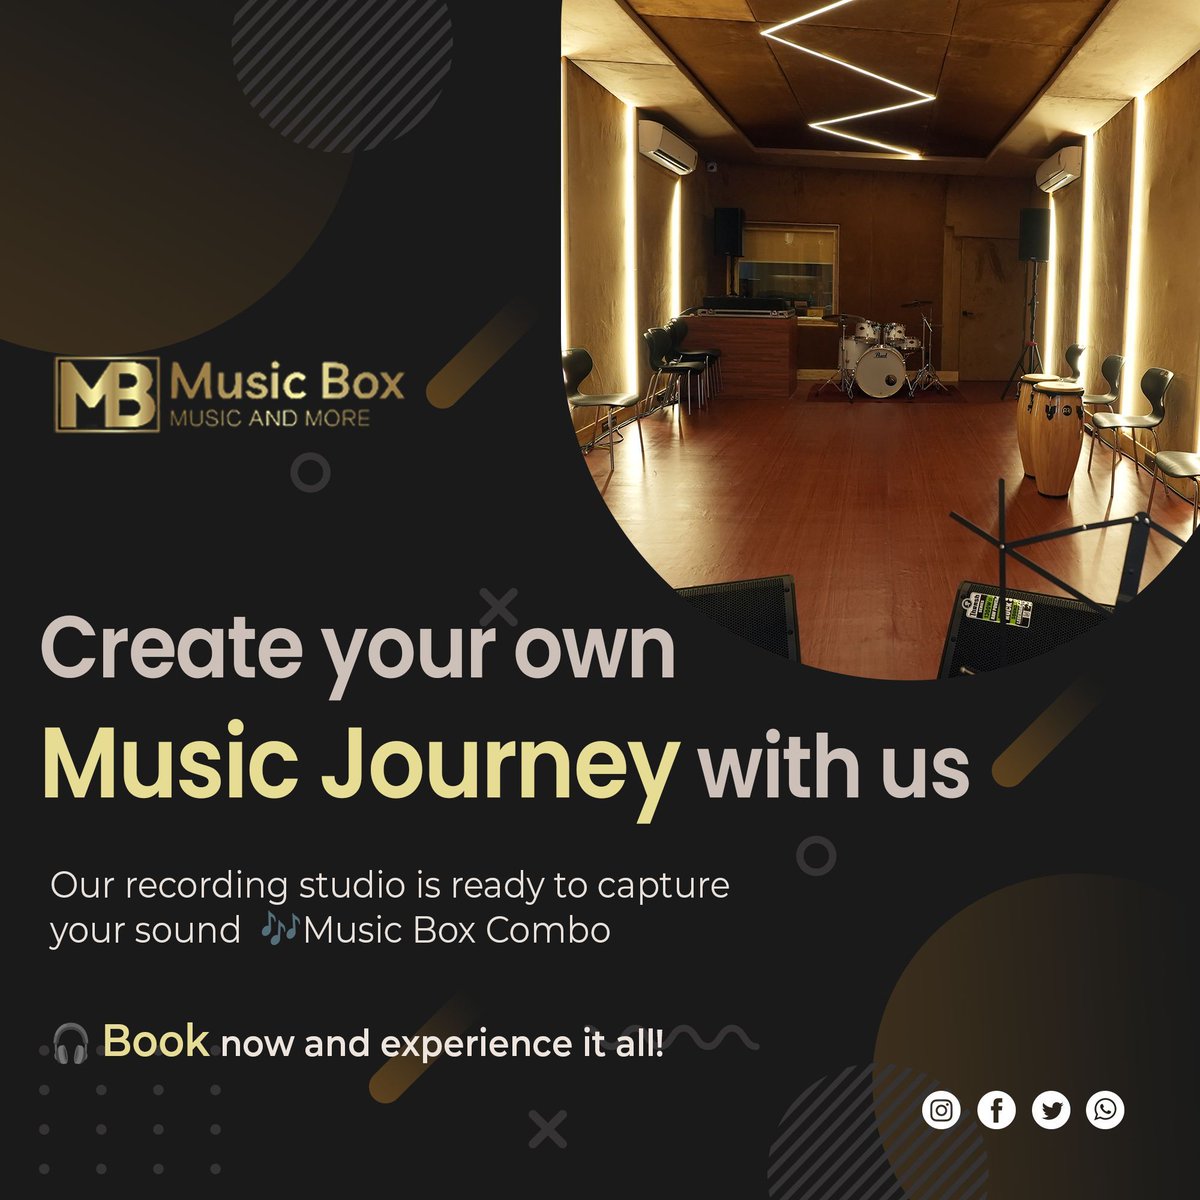 Create your own music journey with us. Our recording studio is ready to capture your sound. 

🎶 Book 6 hour sessions and Get 1 hour Free🎙️ 

#recordingstudio #recordingstudios #jammingstudio #musician #musiciansofinstagram #rockmusicians #singersspotlight #singers